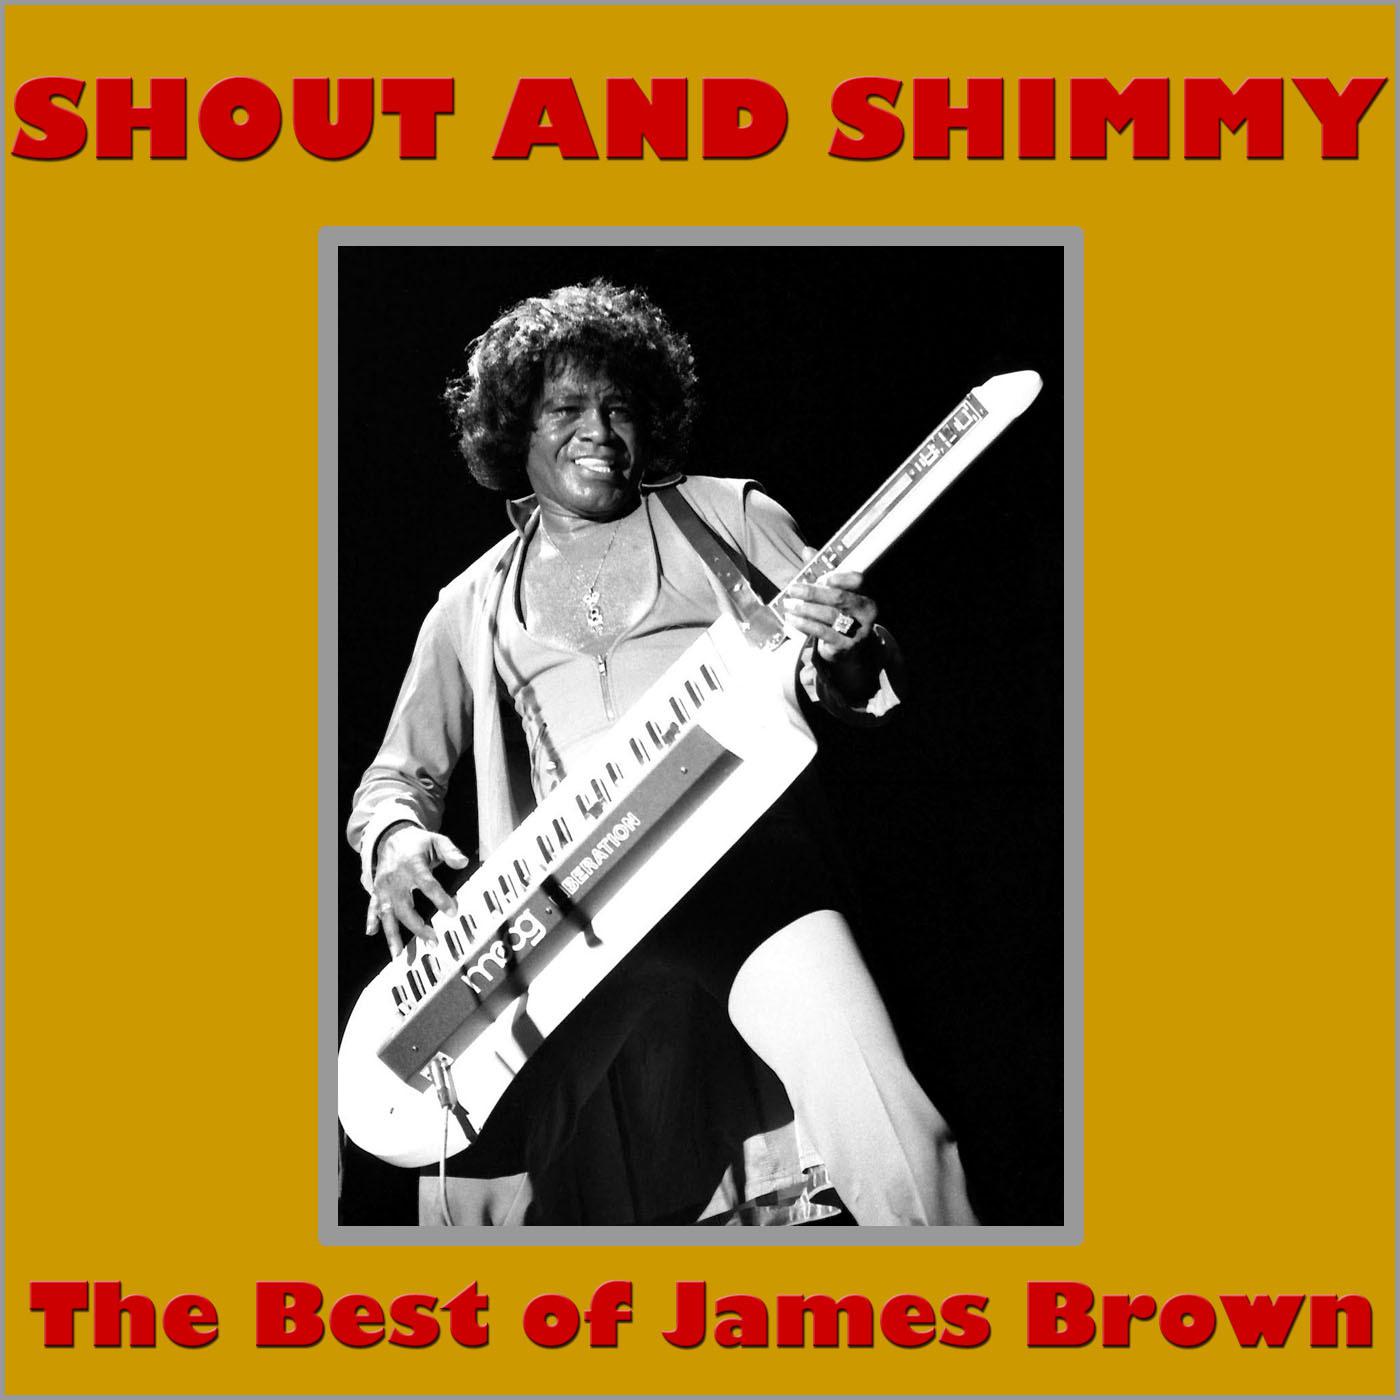 Shout And Shimmy- The Best of James Brown